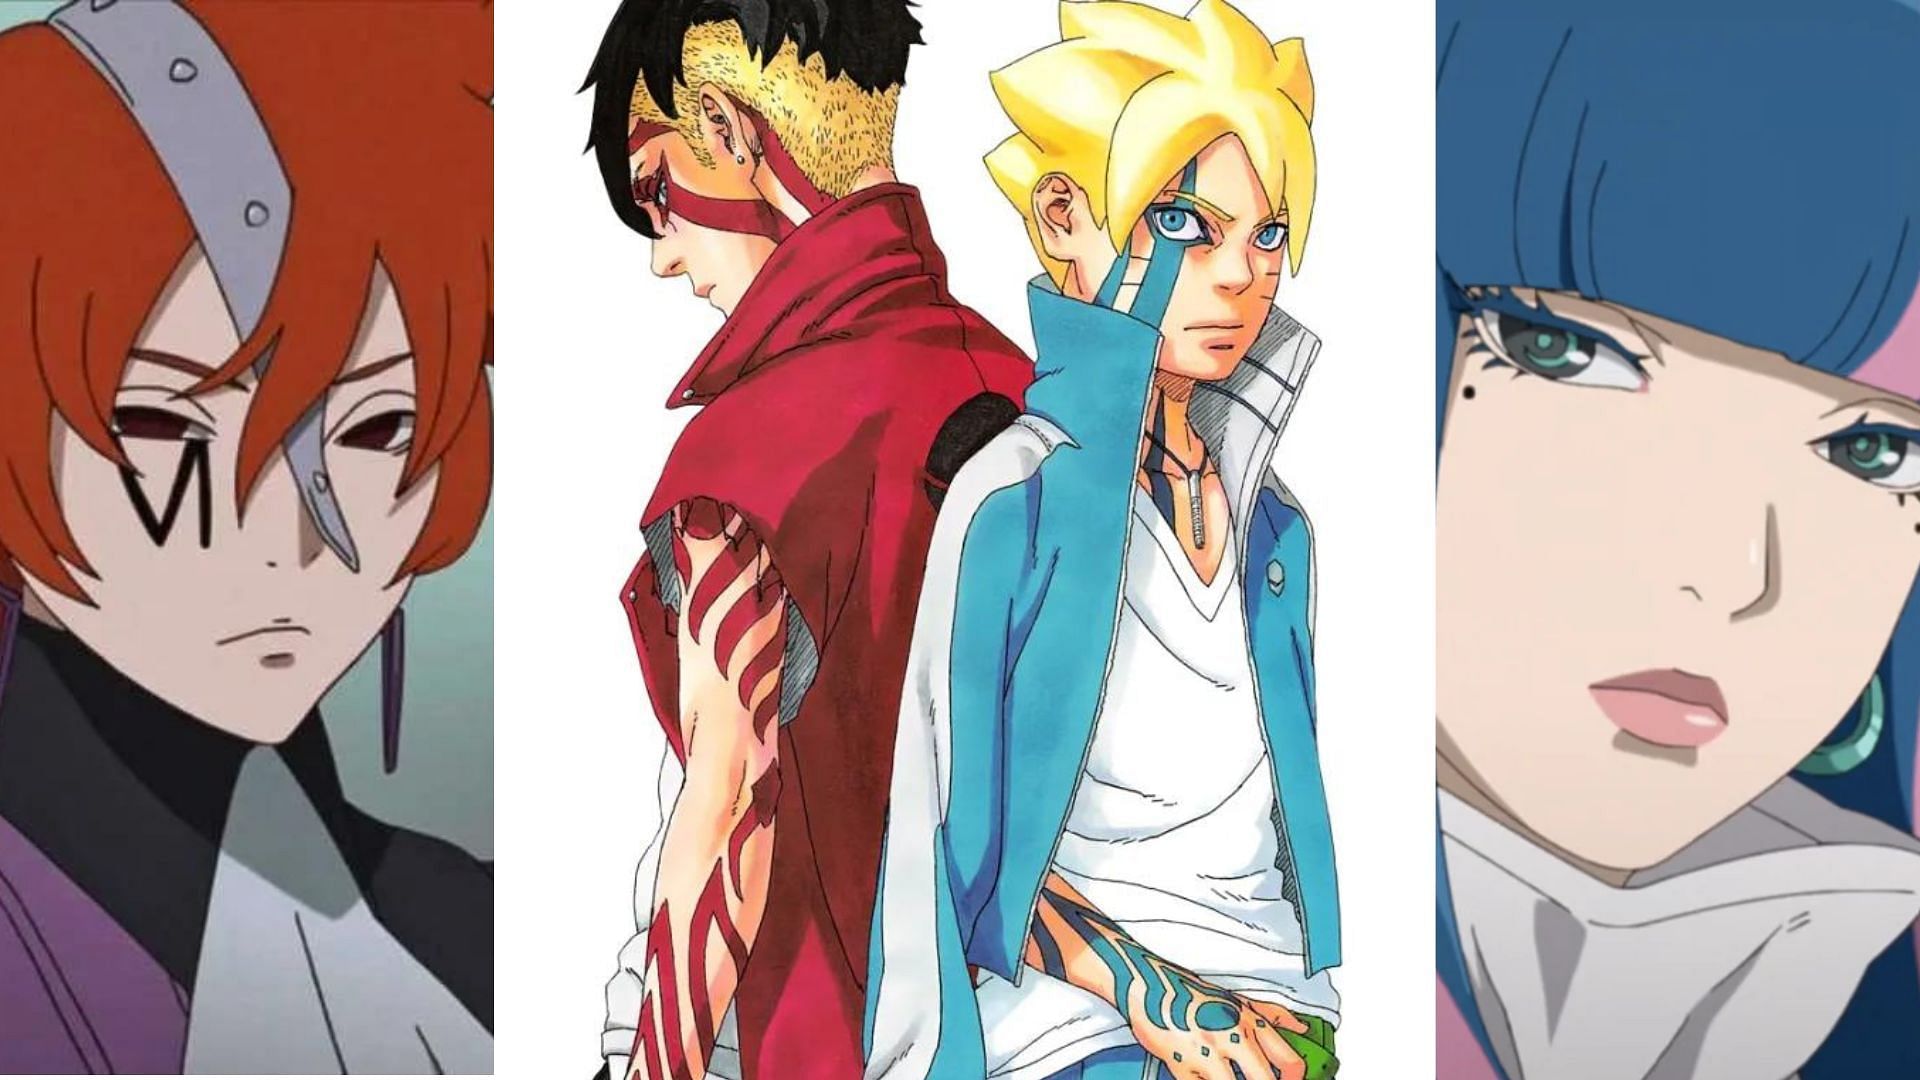 Jaw dropping twists await in 'Boruto' manga series chapter 79. Details here  - Hindustan Times